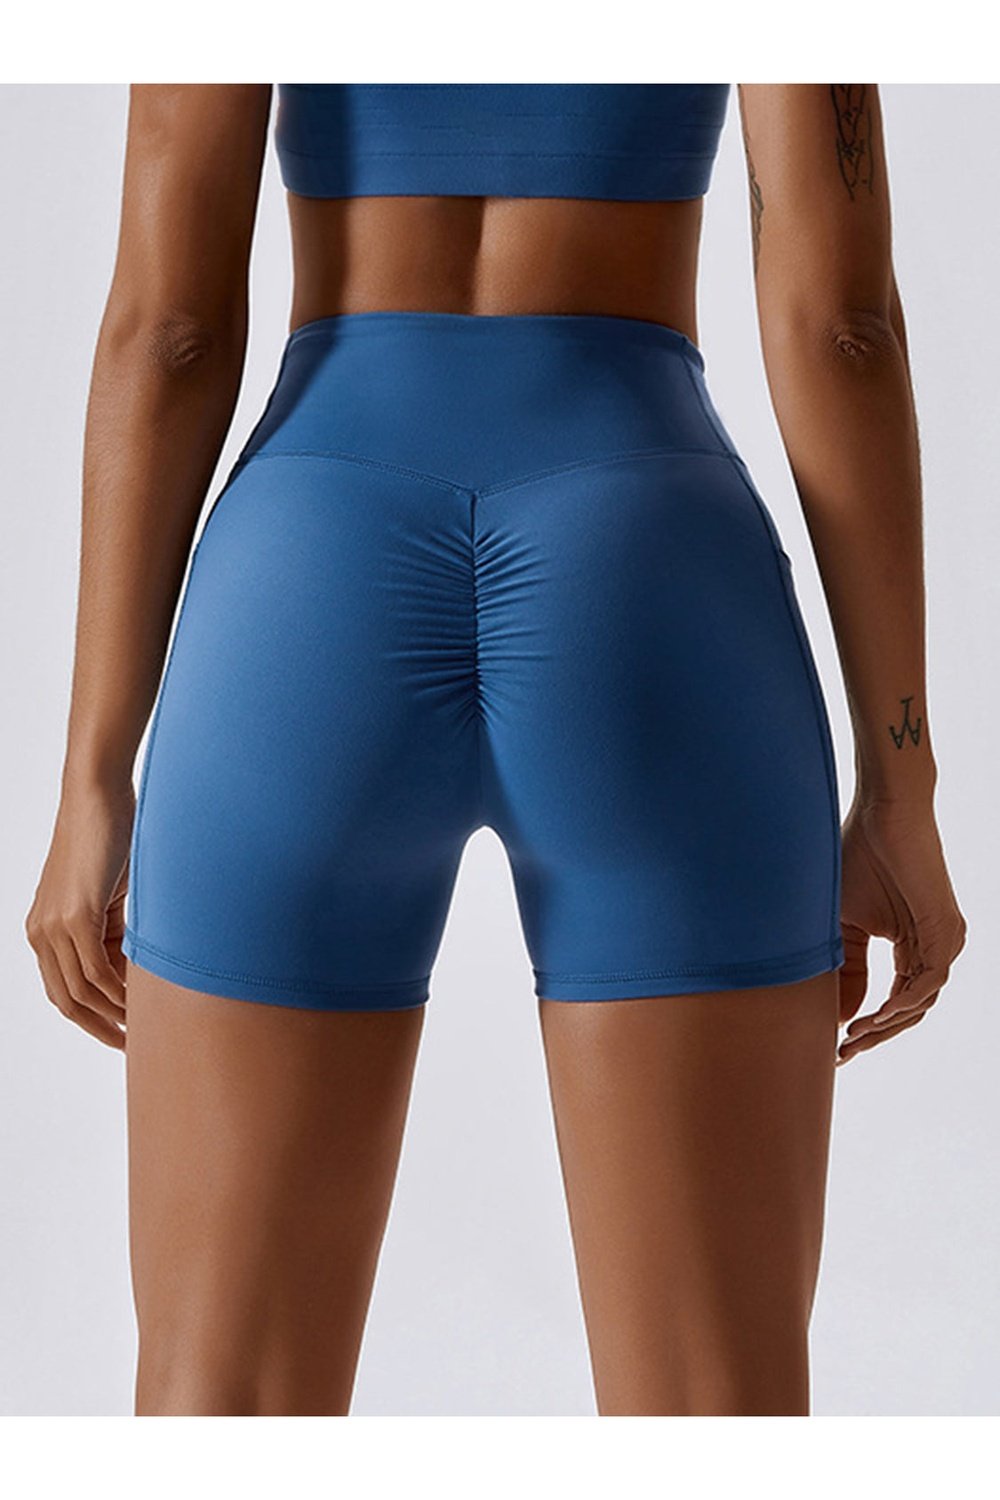 Ruched Pocketed High Waist Active Shorts - Short Leggings - FITGGINS